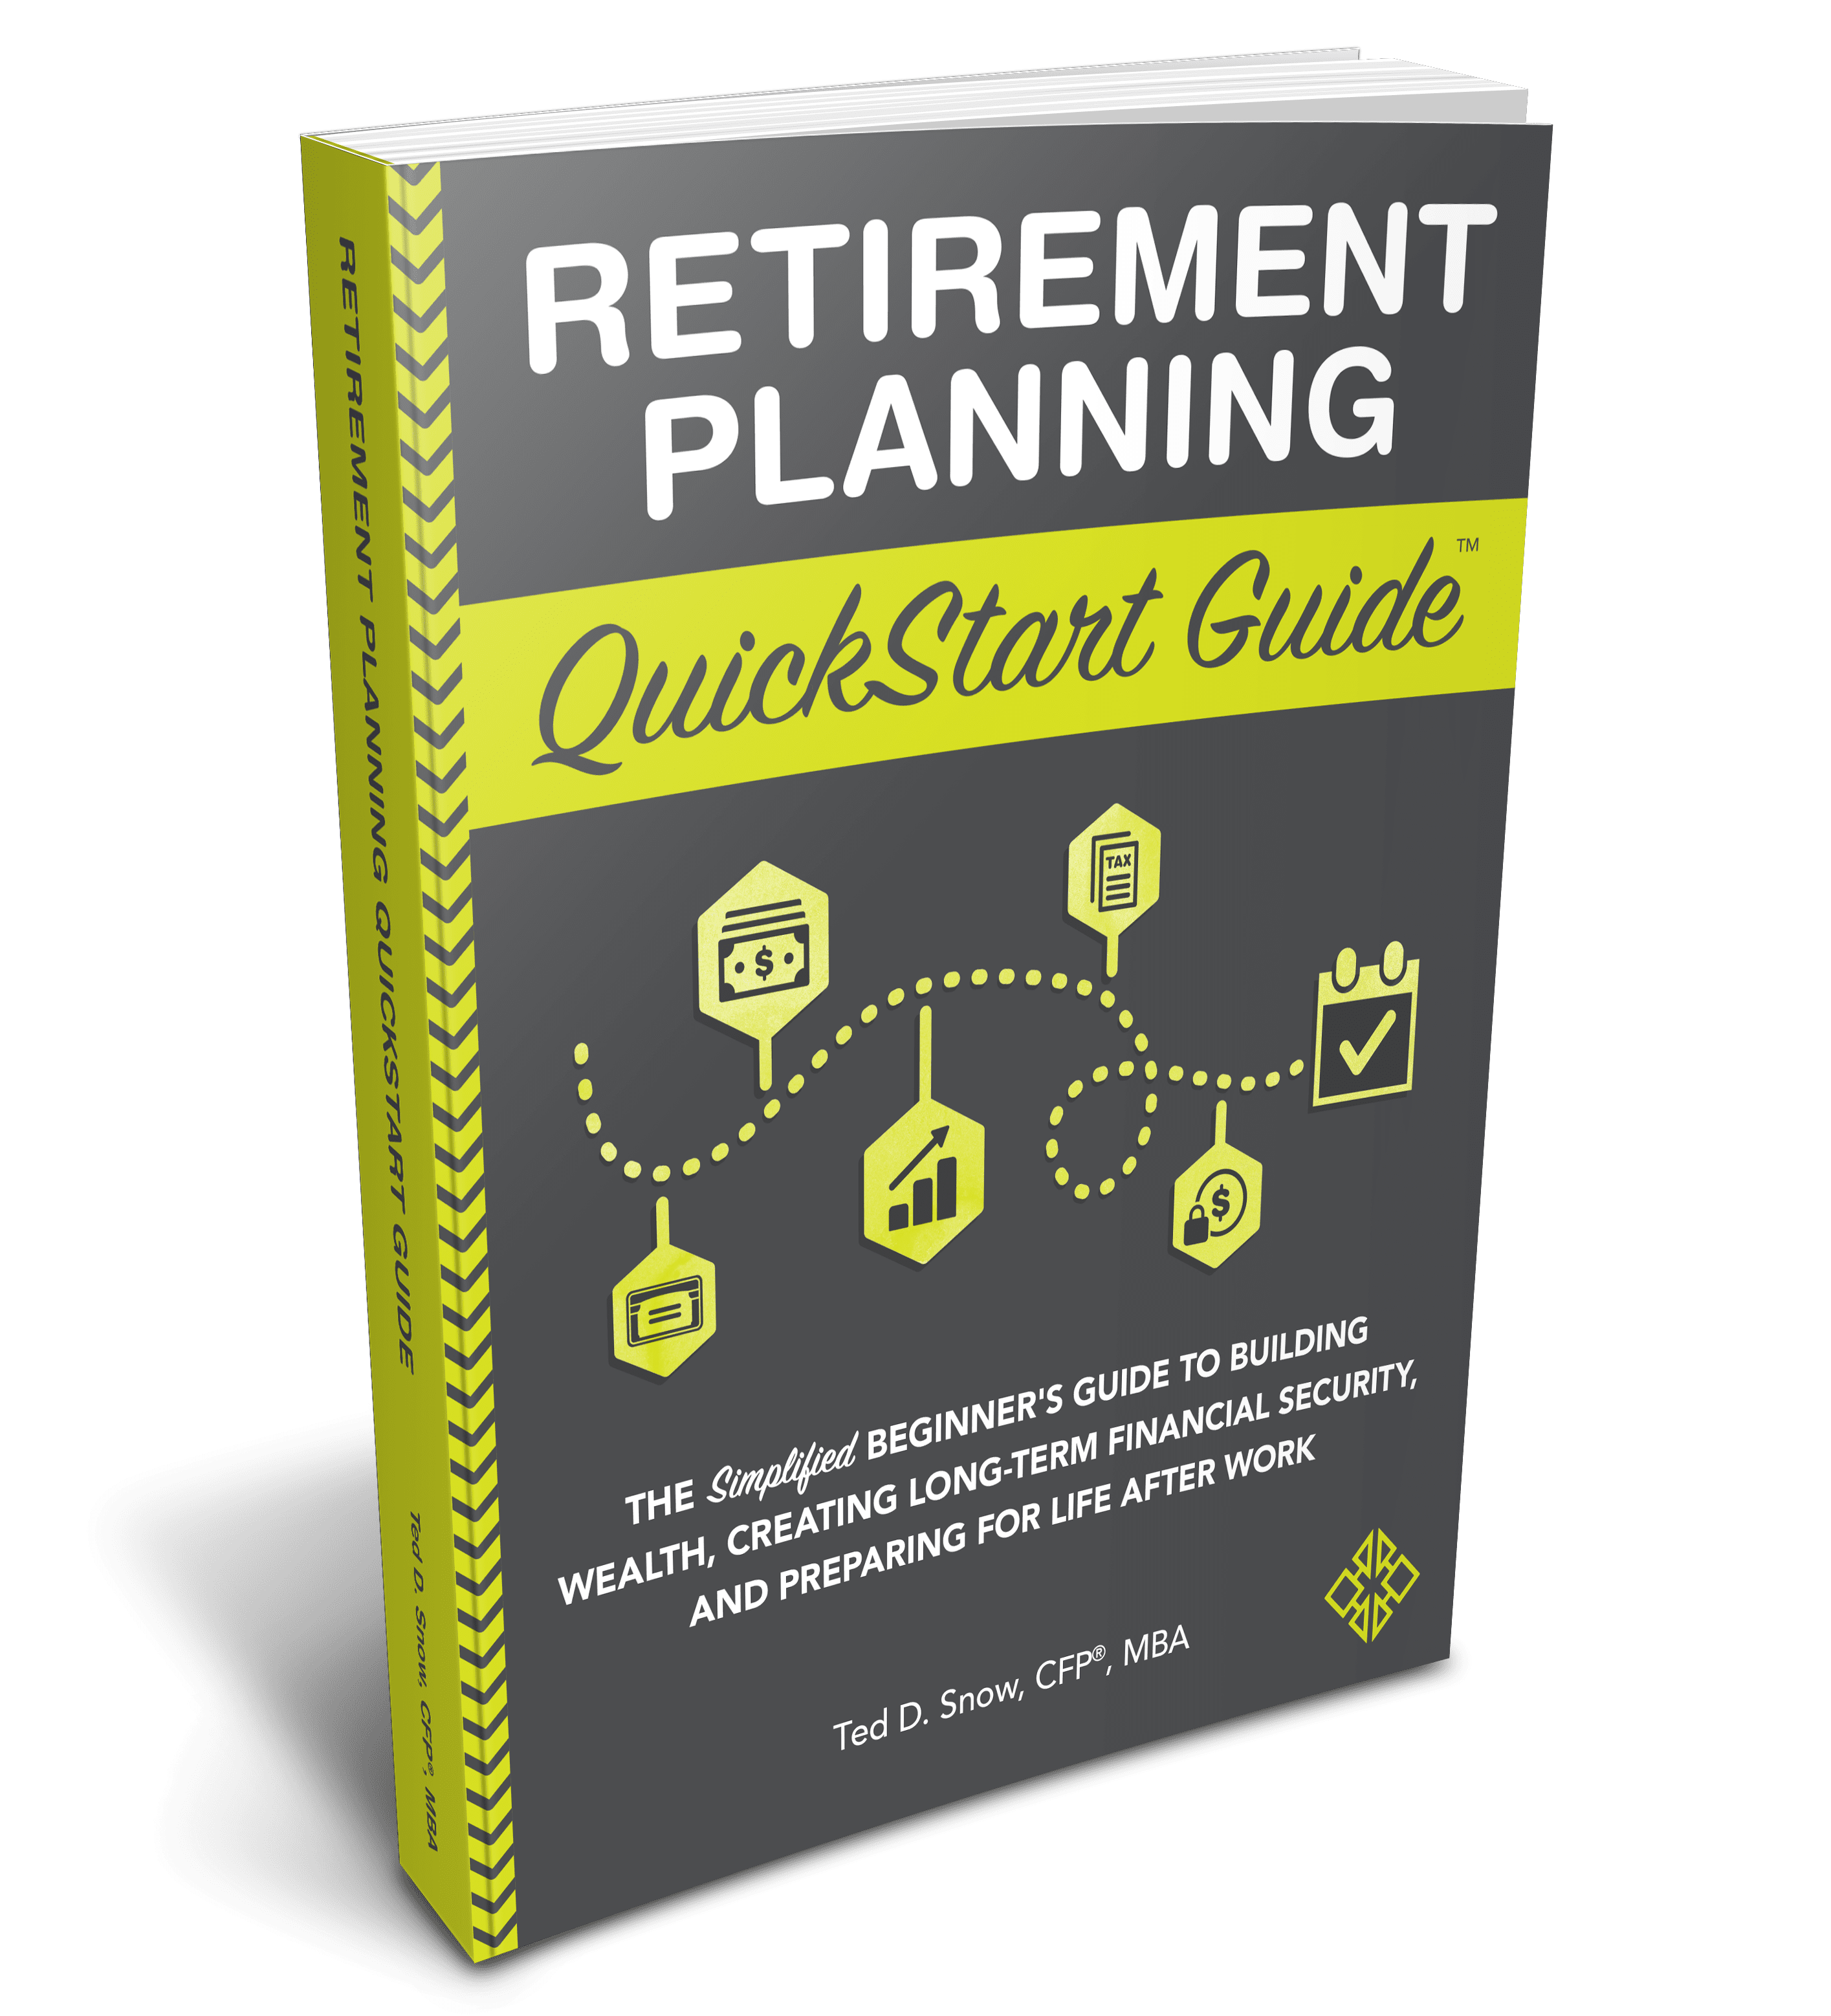 Retirement Planning QuickStart Guide by Ted D. Snow CFP, MBA